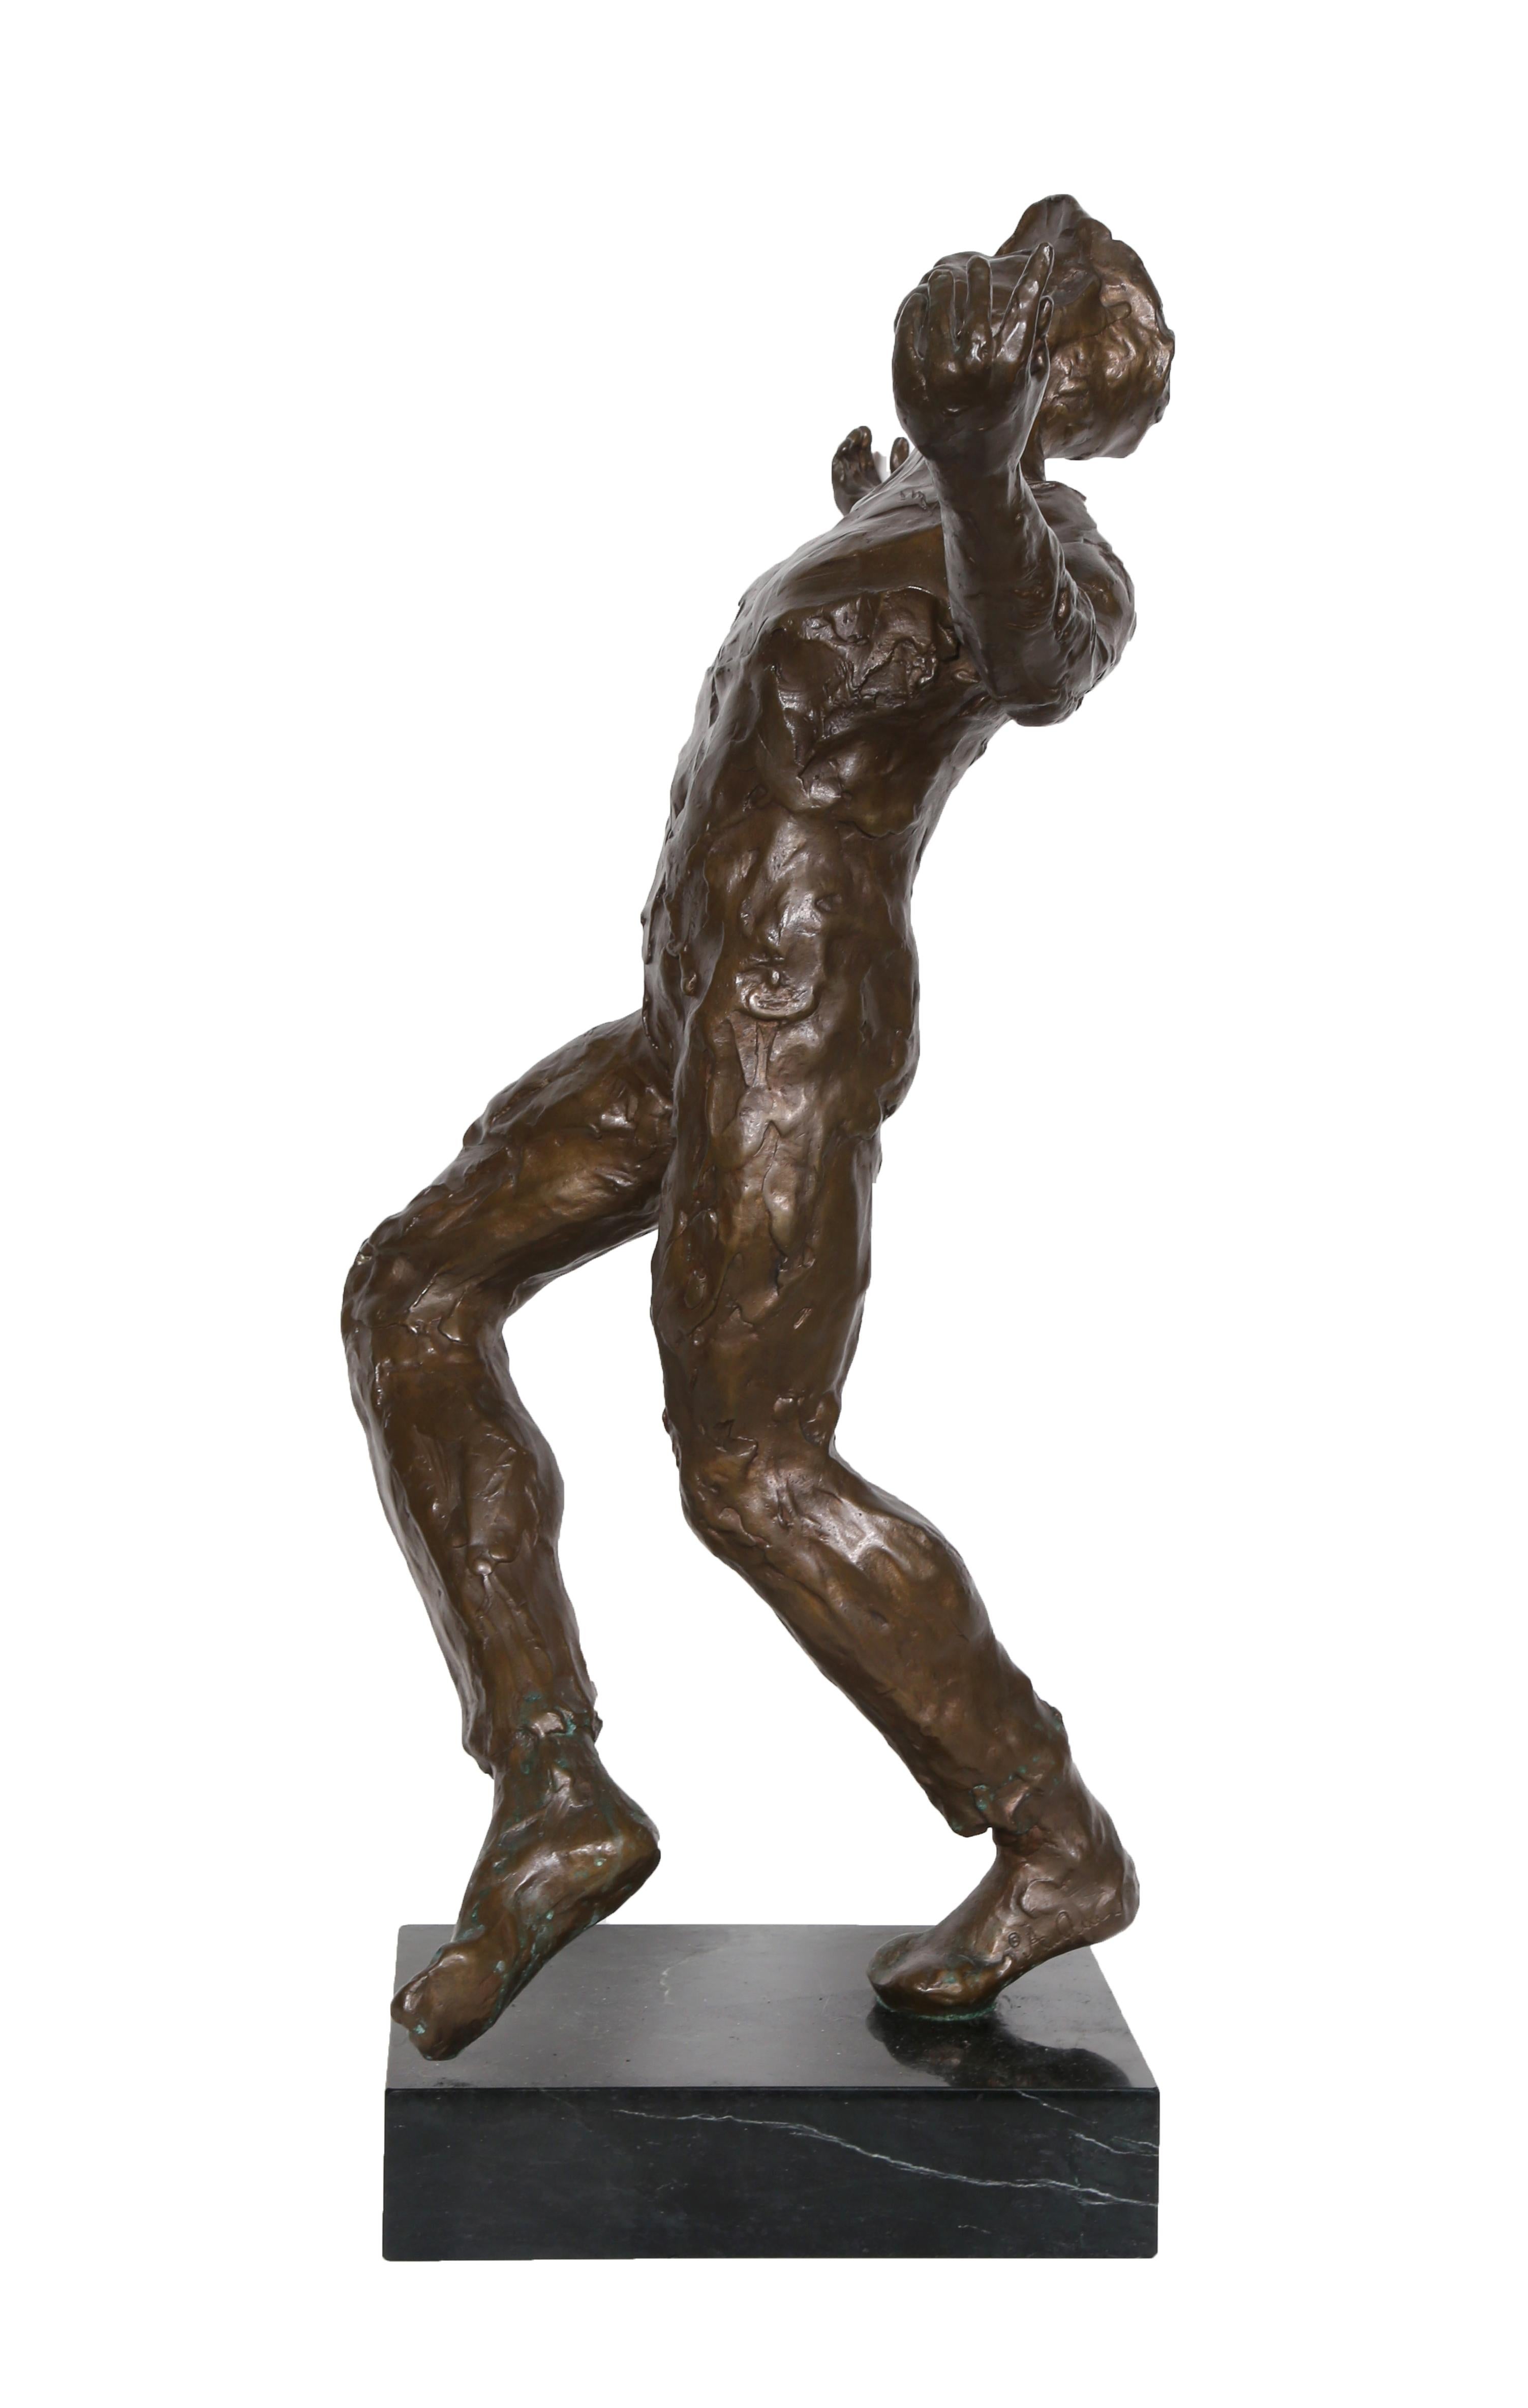 Artist: Anthony Quinn
Title: Song of Zorba 
Year: 1984
Medium: Bronze sculpture on marble base, signature and year inscribed
Size: 24 in. x 20 in. x 9 in. (60.96 cm x 50.8 cm x 22.86 cm)